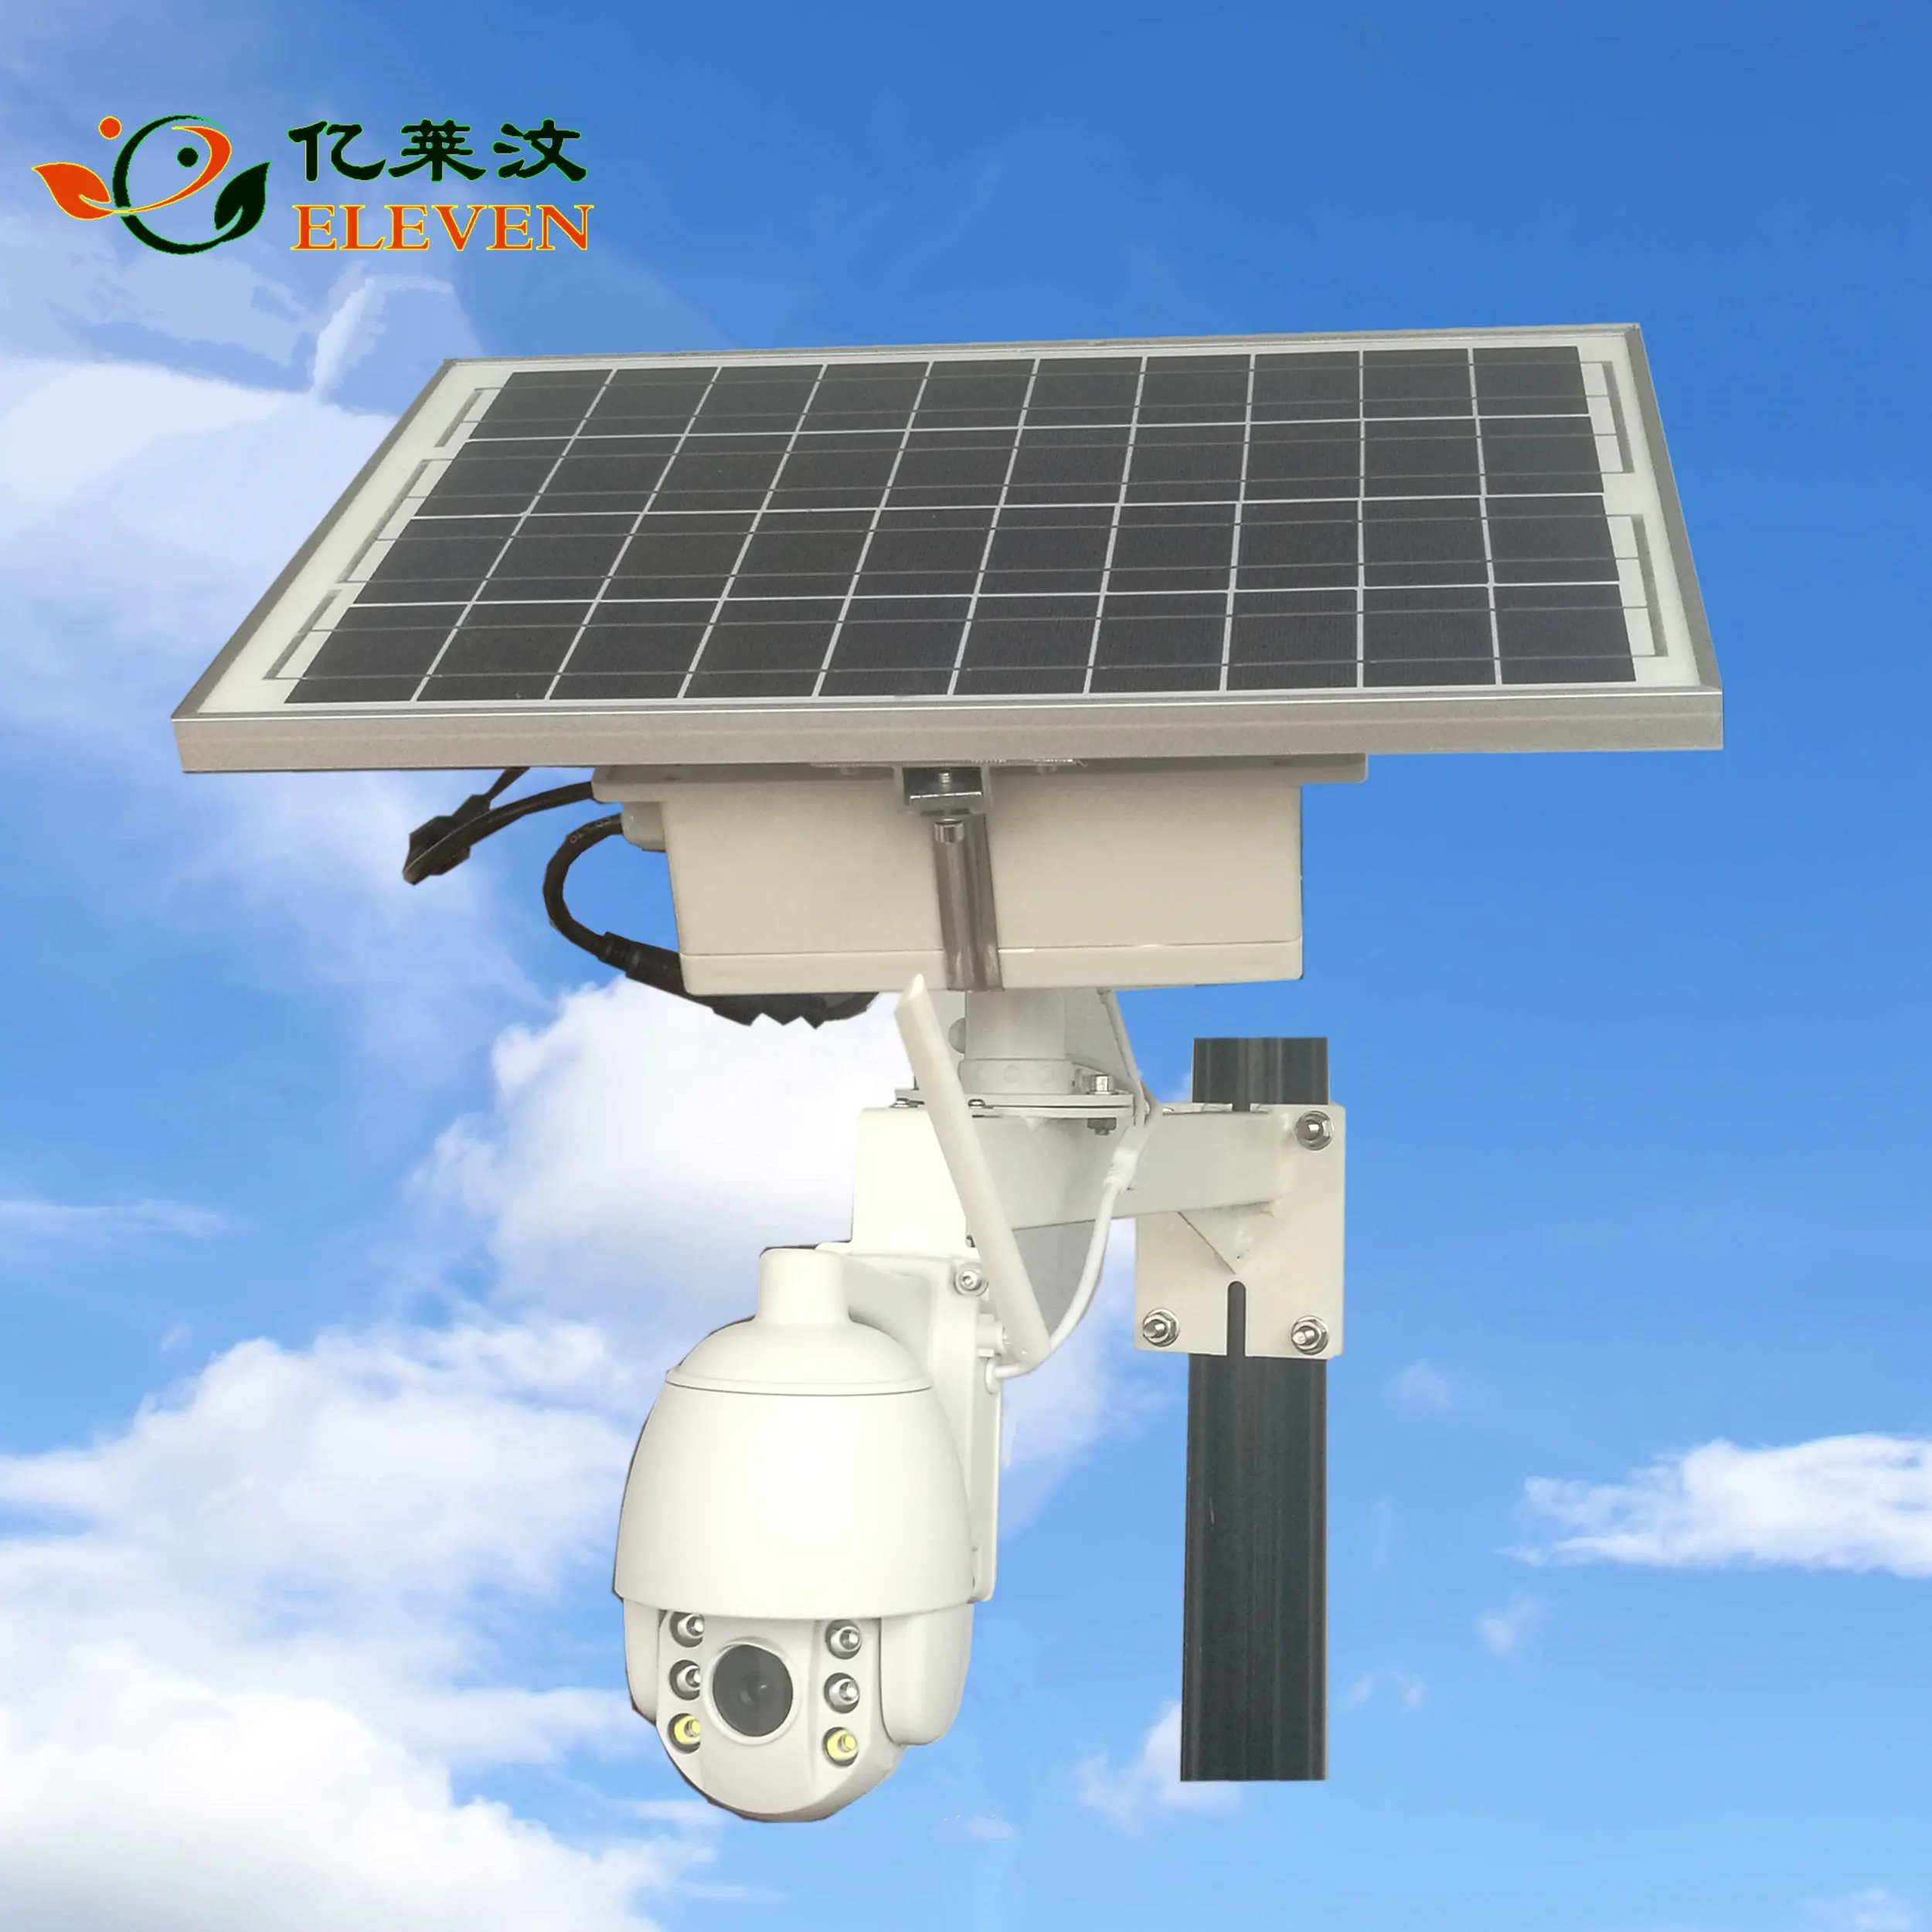 Wholesale solar powered outdoor 360 4g/3g wifi ptz ip security camera applied in outdoor